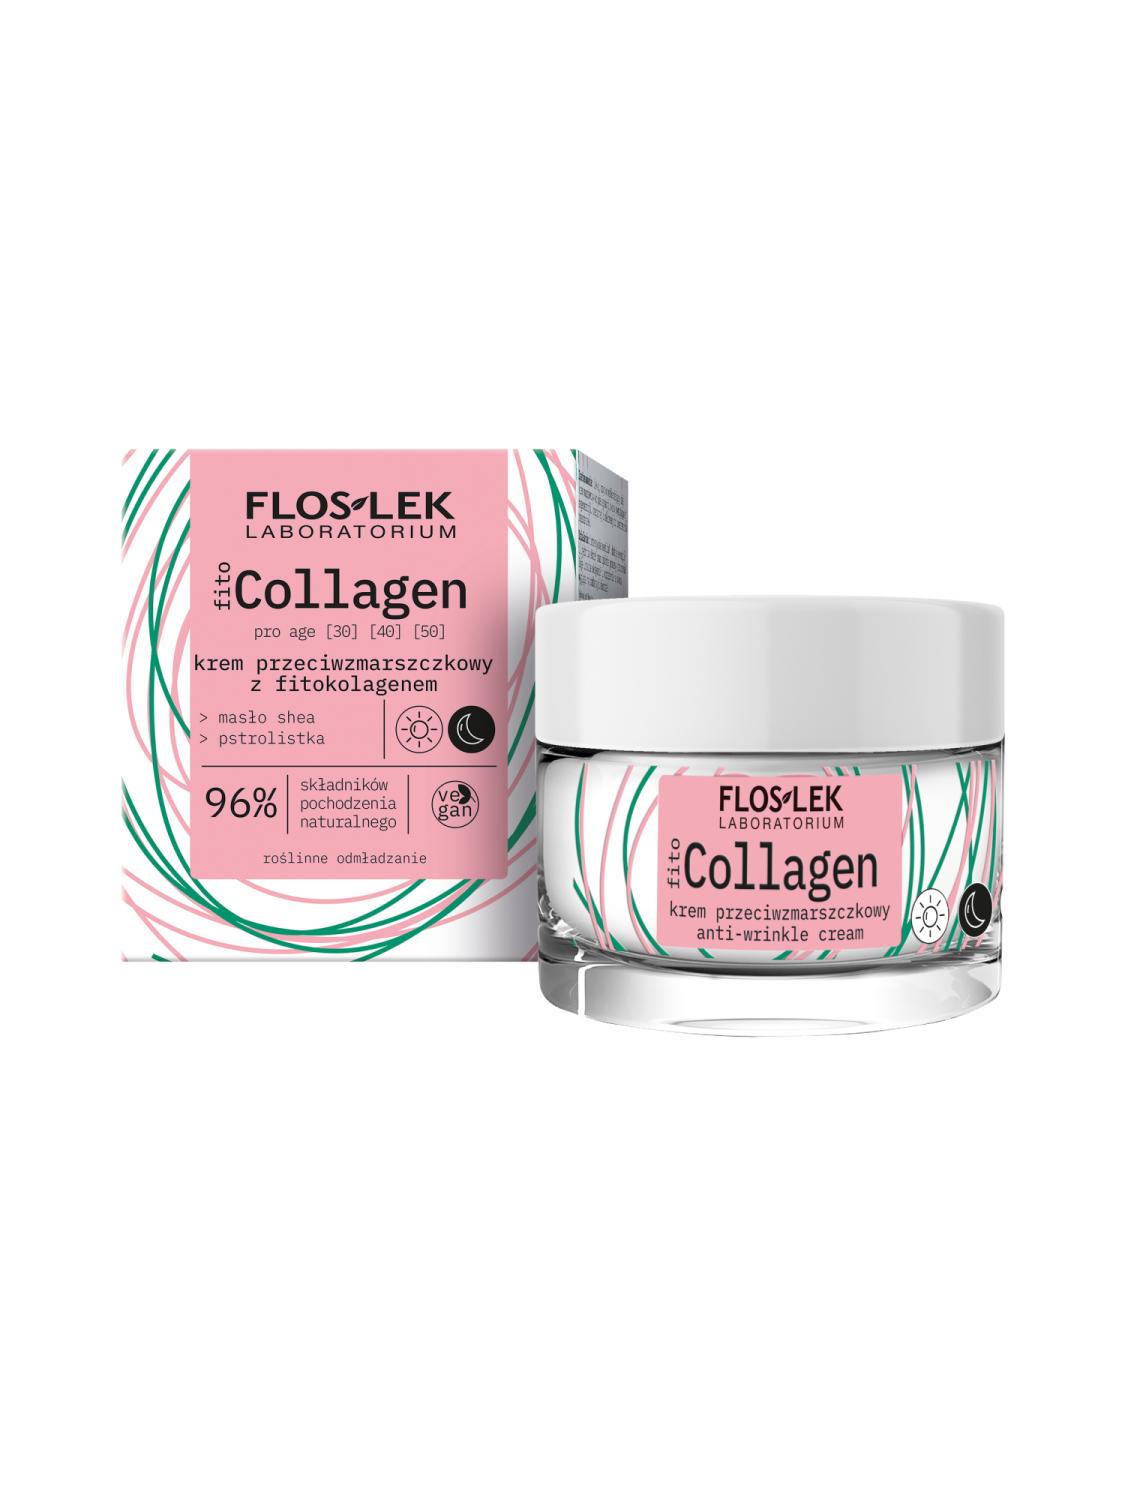 fitoCOLLAGEN pro age Anti-wrinkle cream with phyto-collagen 50 ml - Floslek